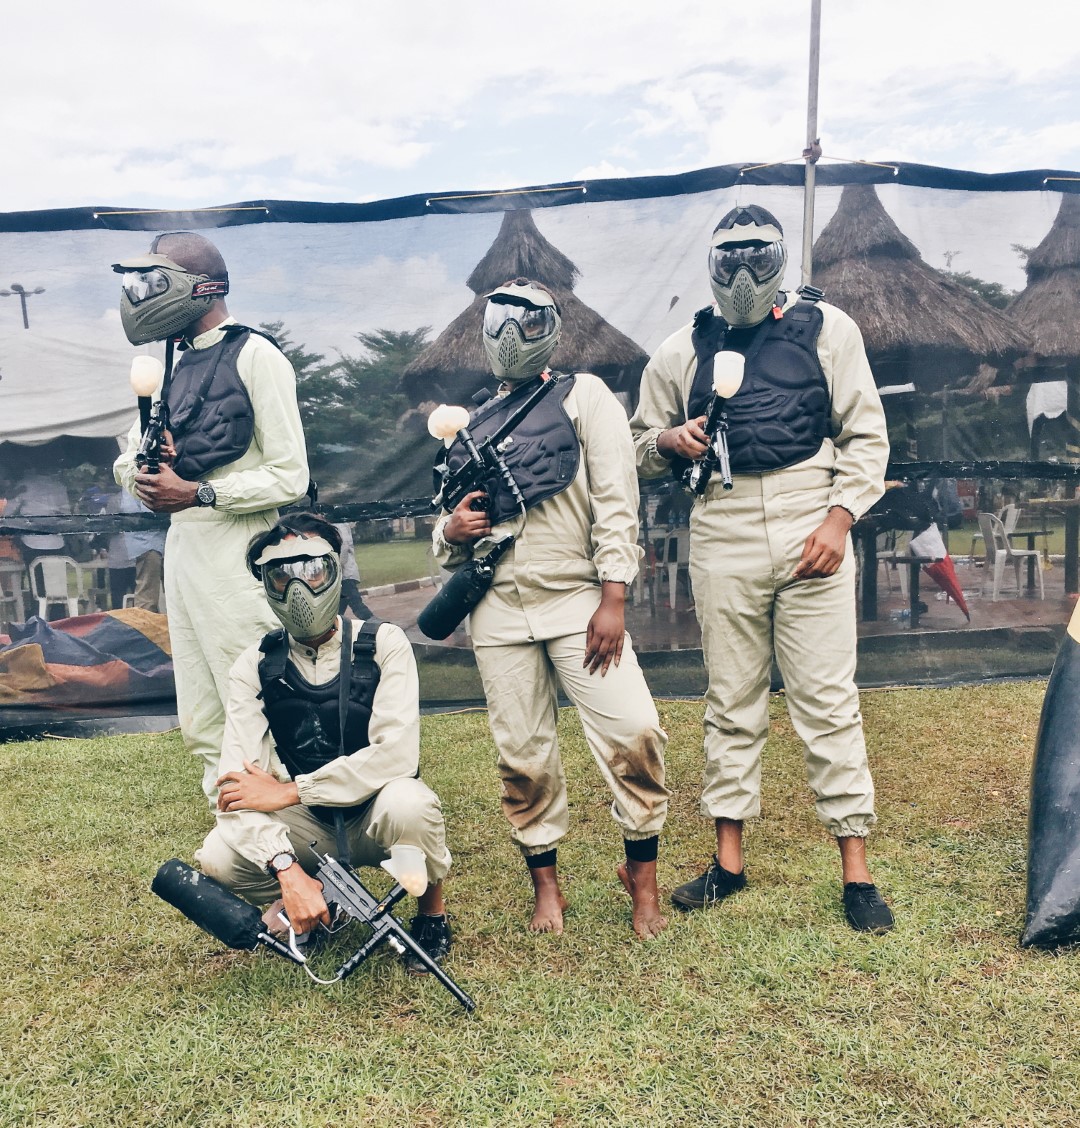 Cassie Daves paintballing things to do in lagos